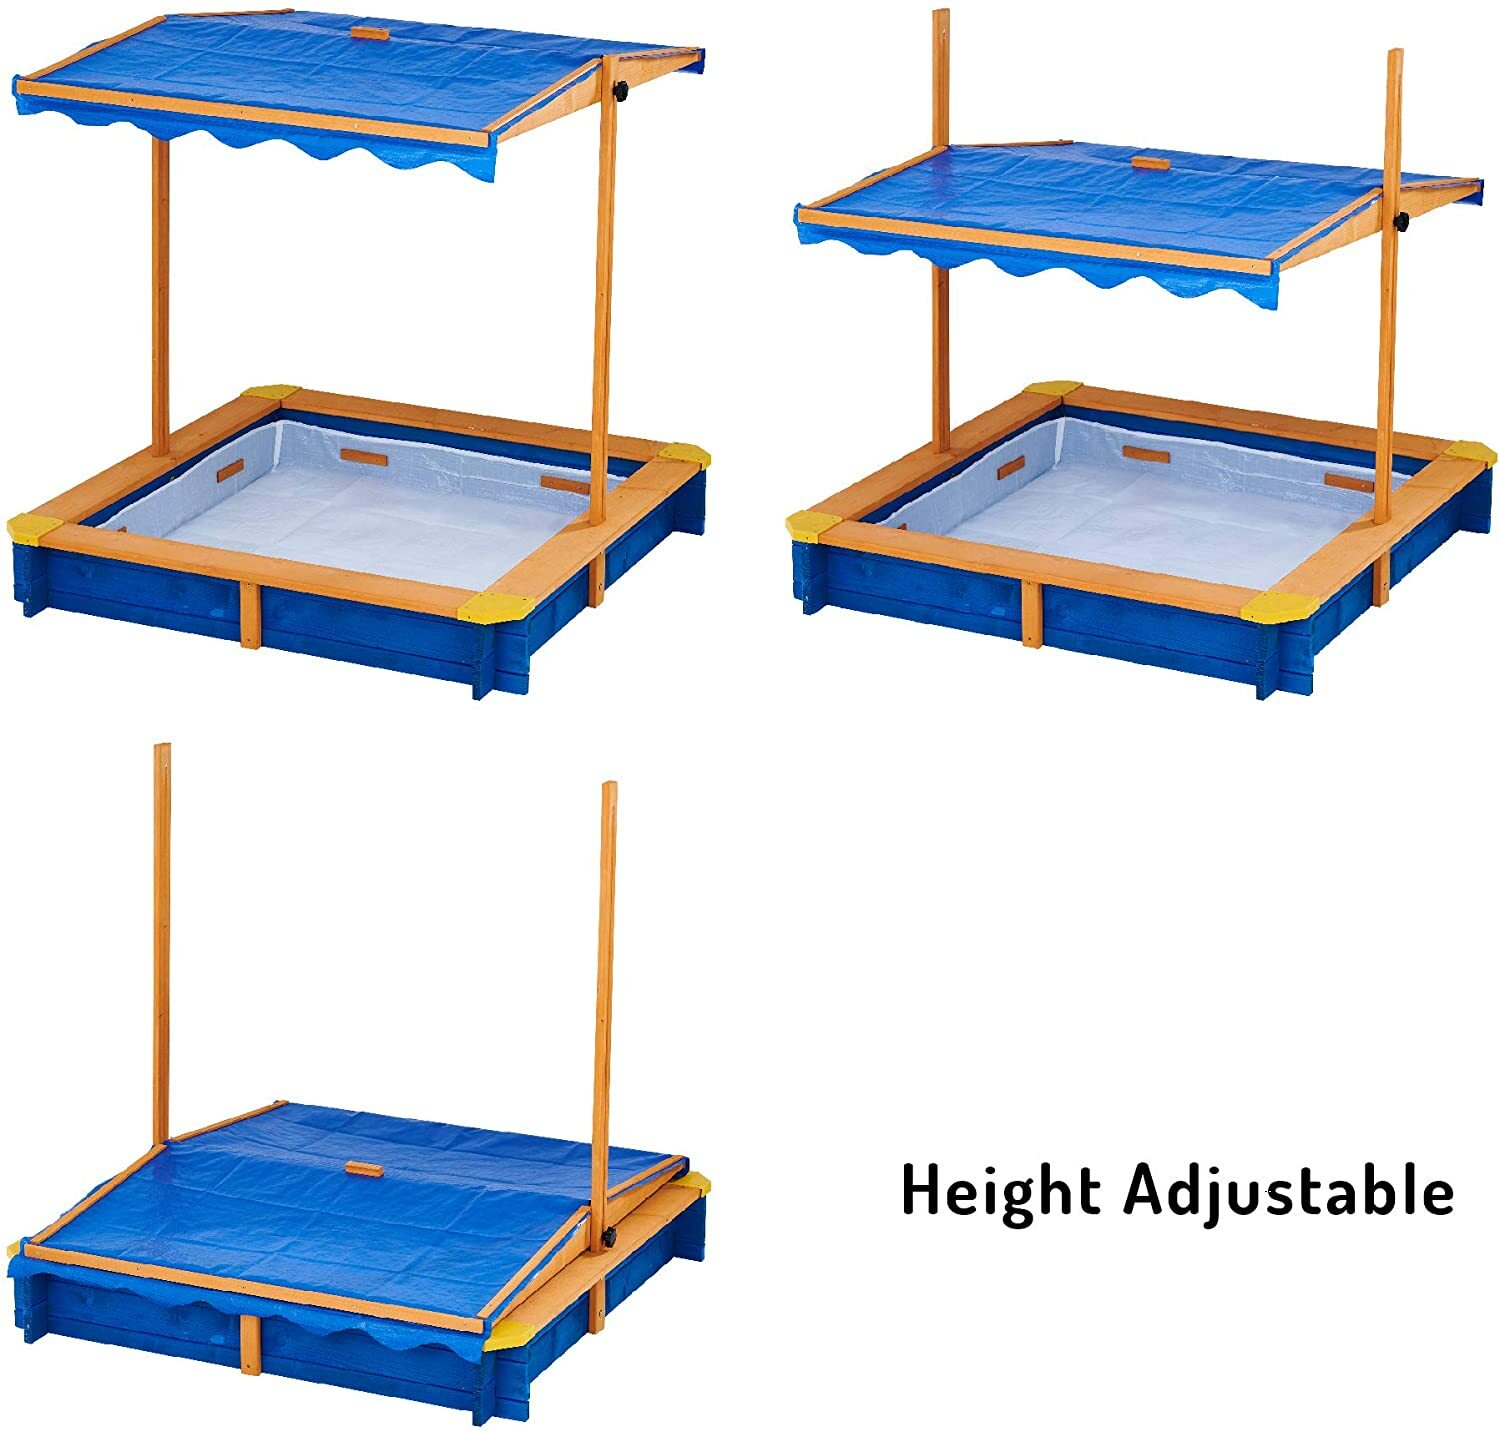 Sand Pit with Lid - 1.2m x 1.2m